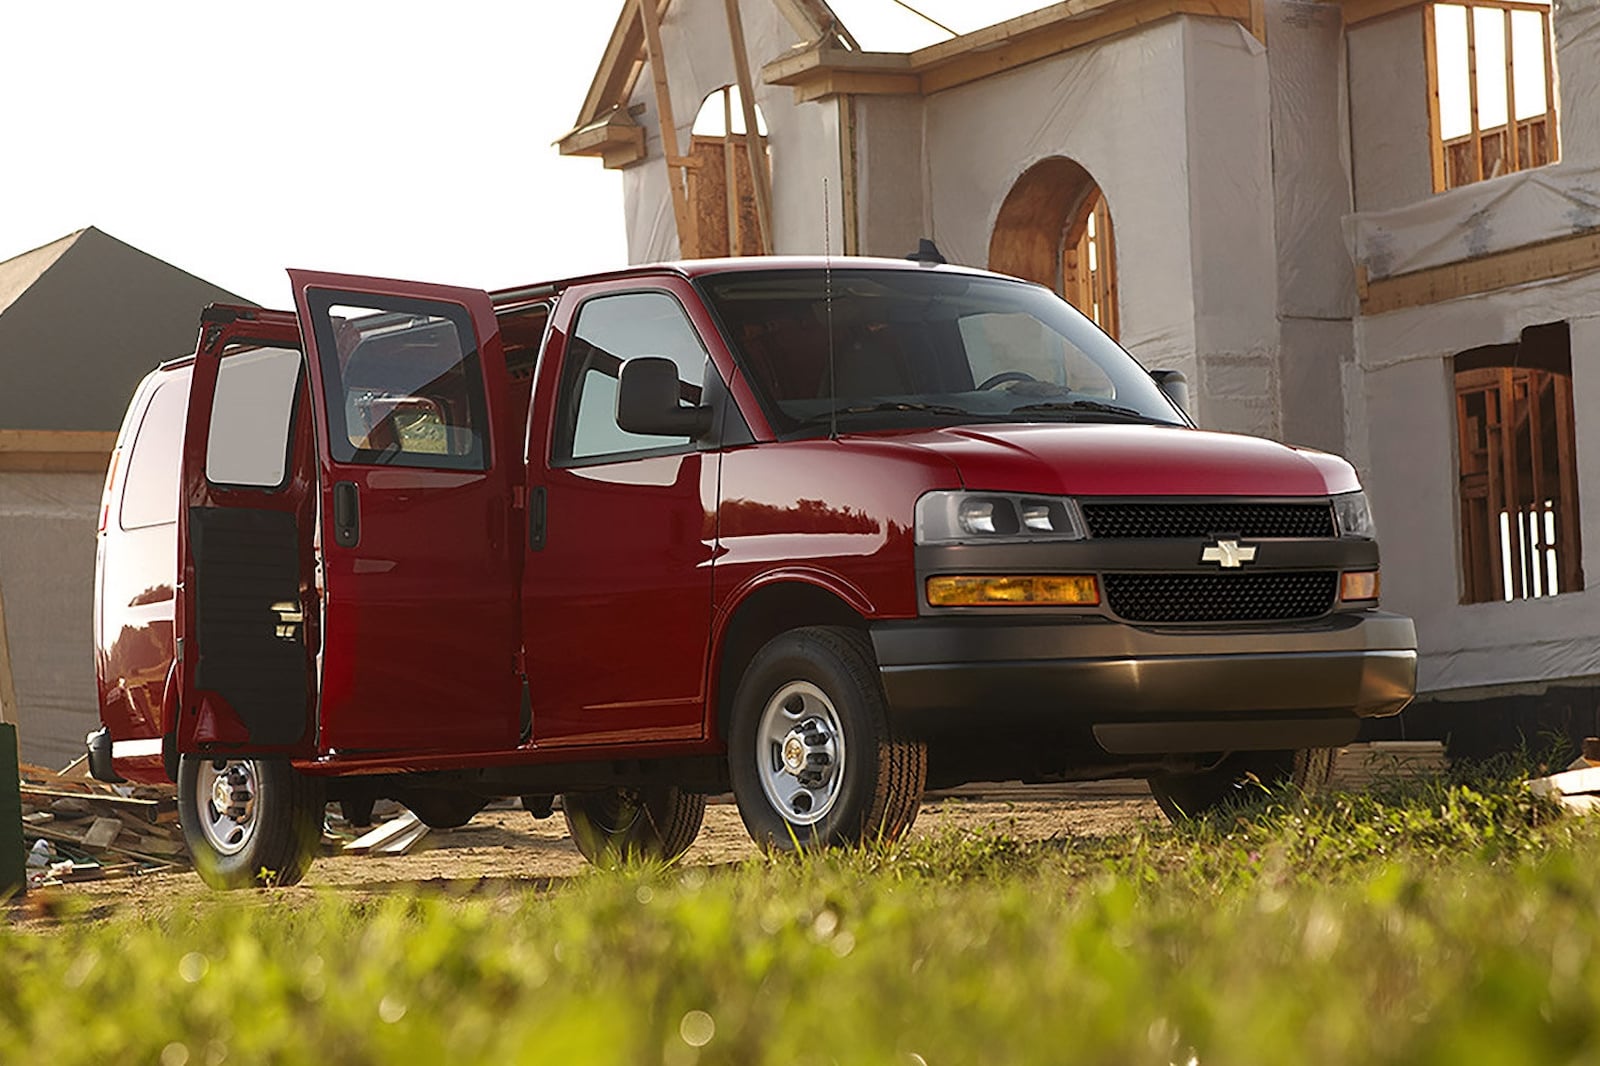 Americas Ancient Gas-Powered V8 Vans Will Finally Be Replaced